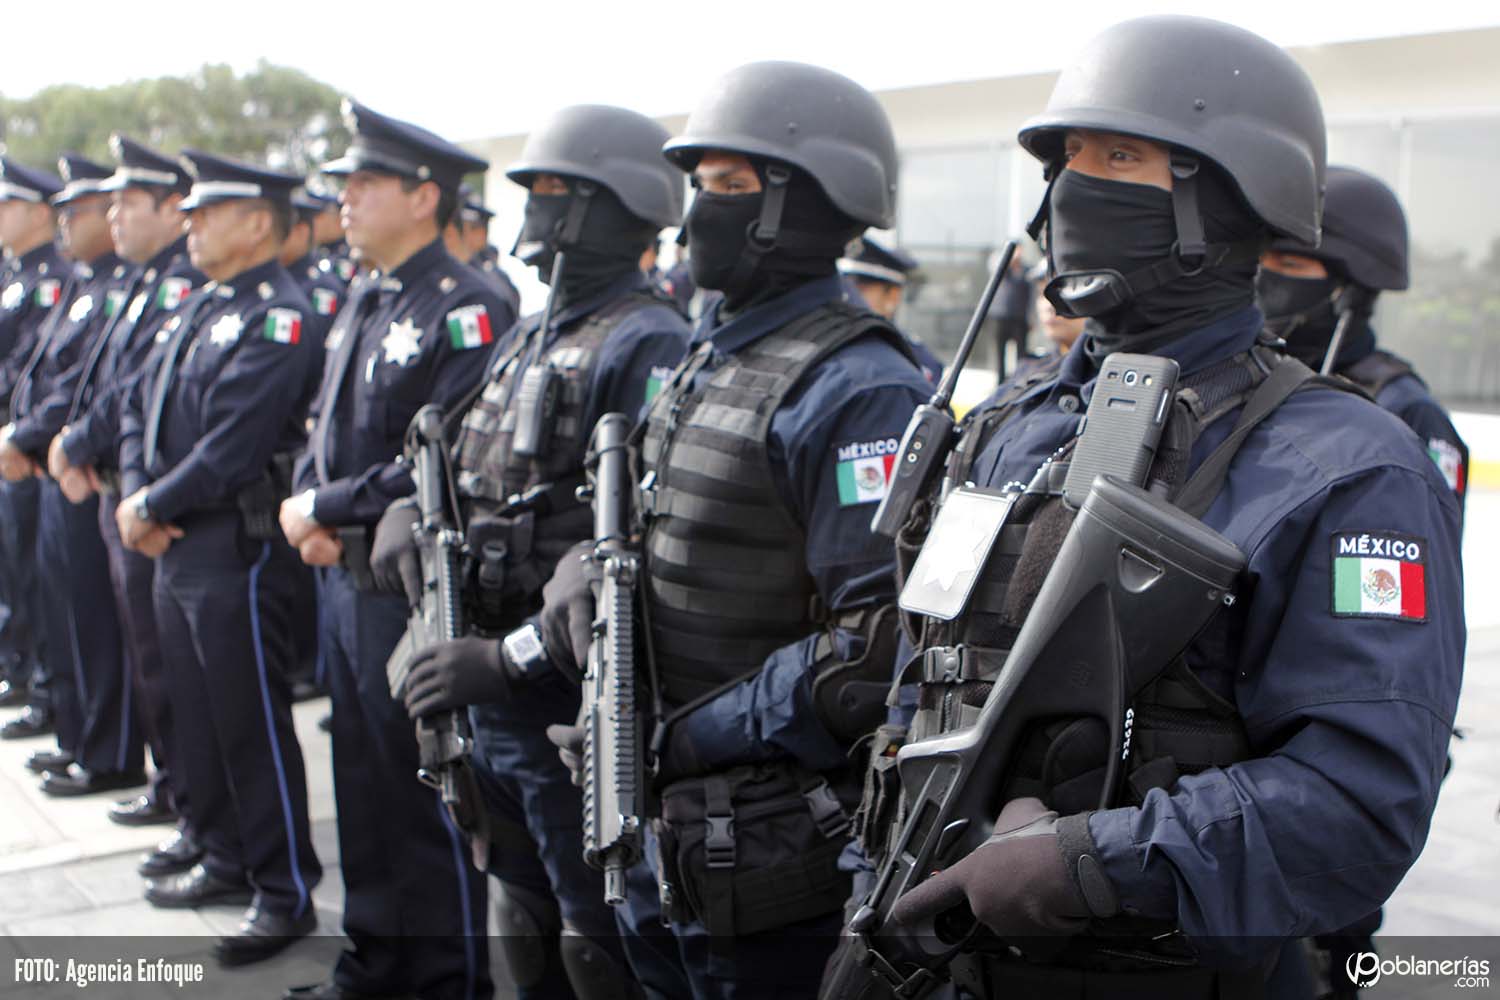 Being a policeman in Mexico